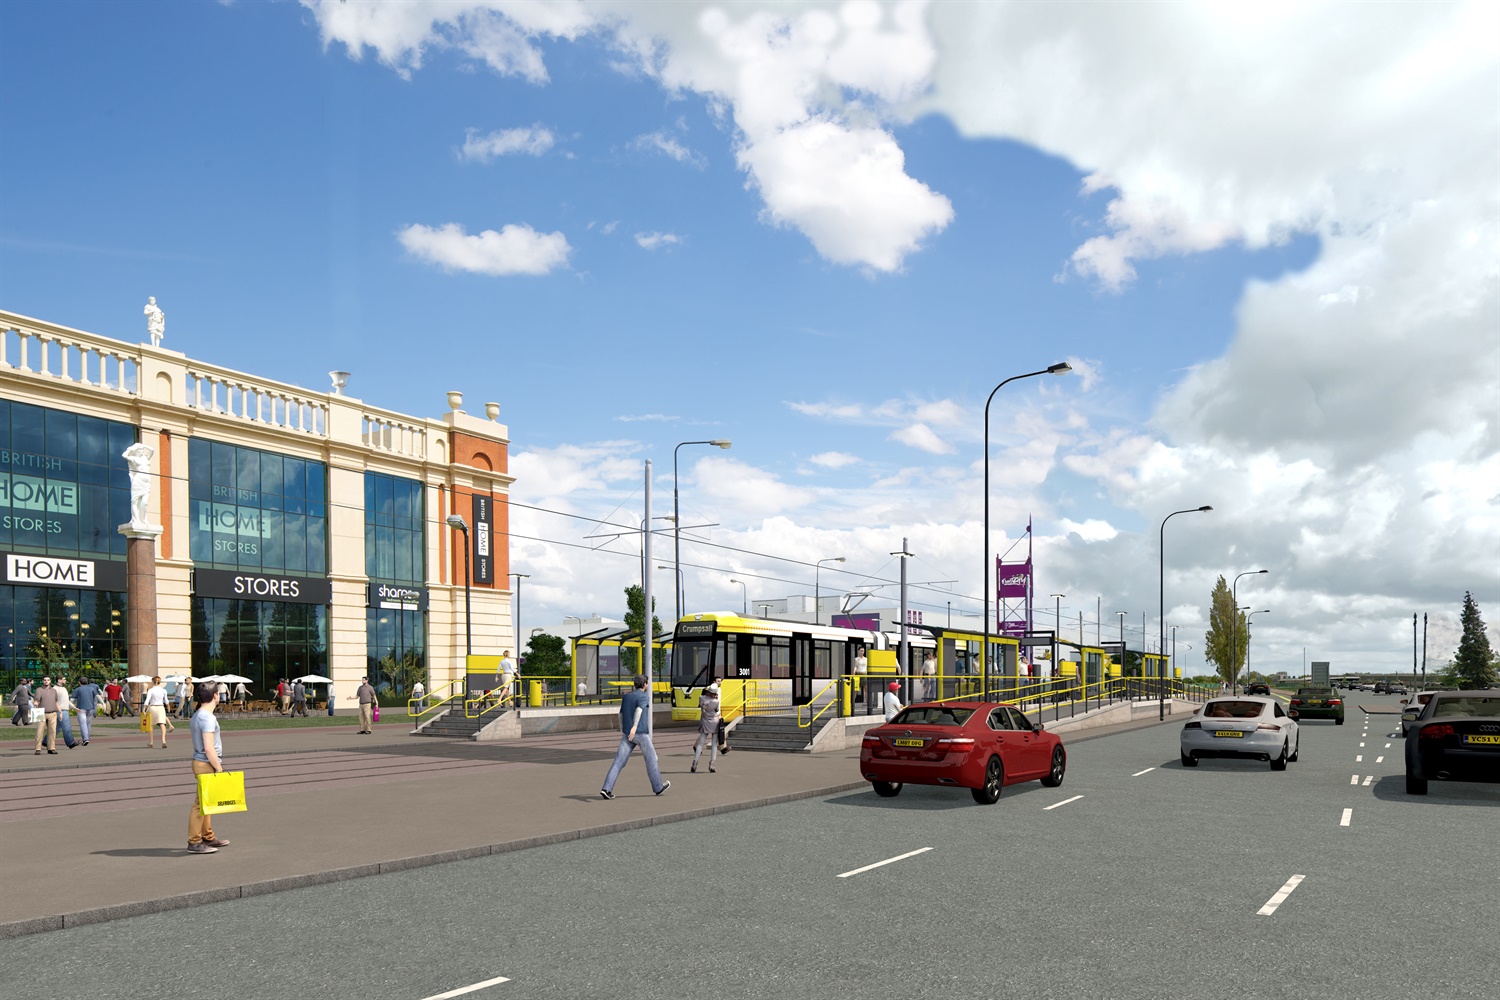 MPT wins £350m contract to build Metrolink’s Trafford Park extension